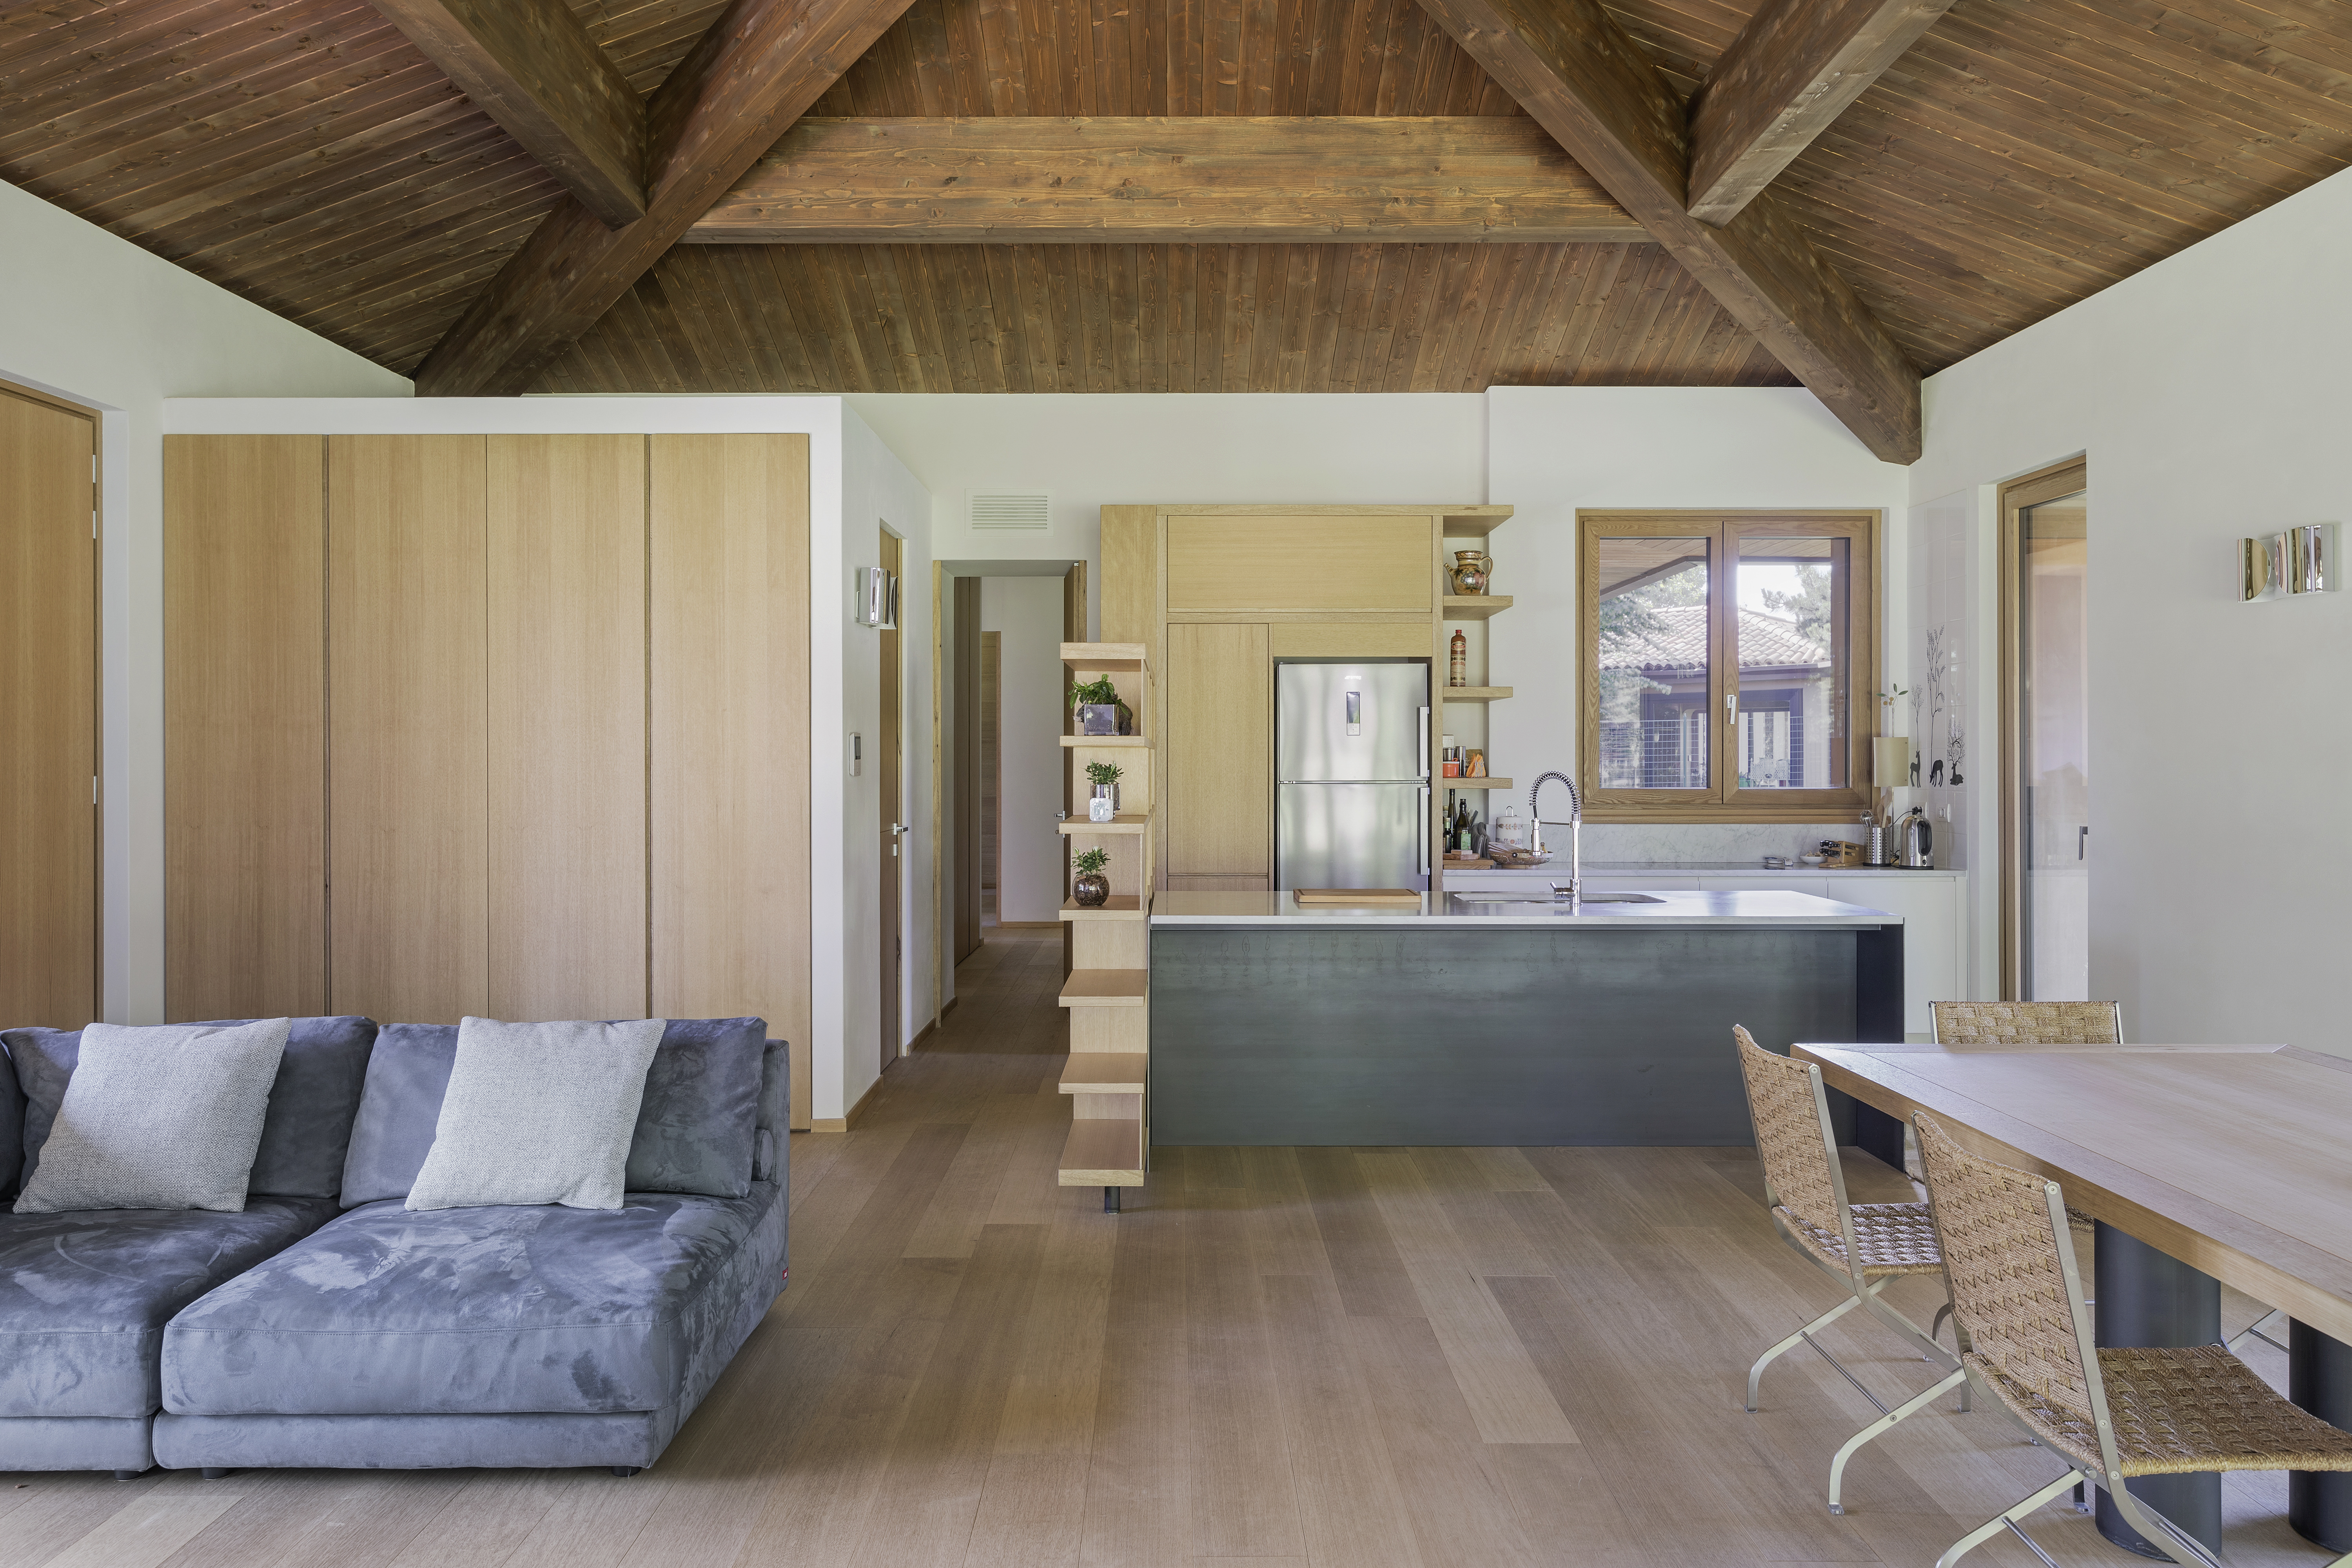 Interior: openspace with parquet floor and exposed wooden roof 